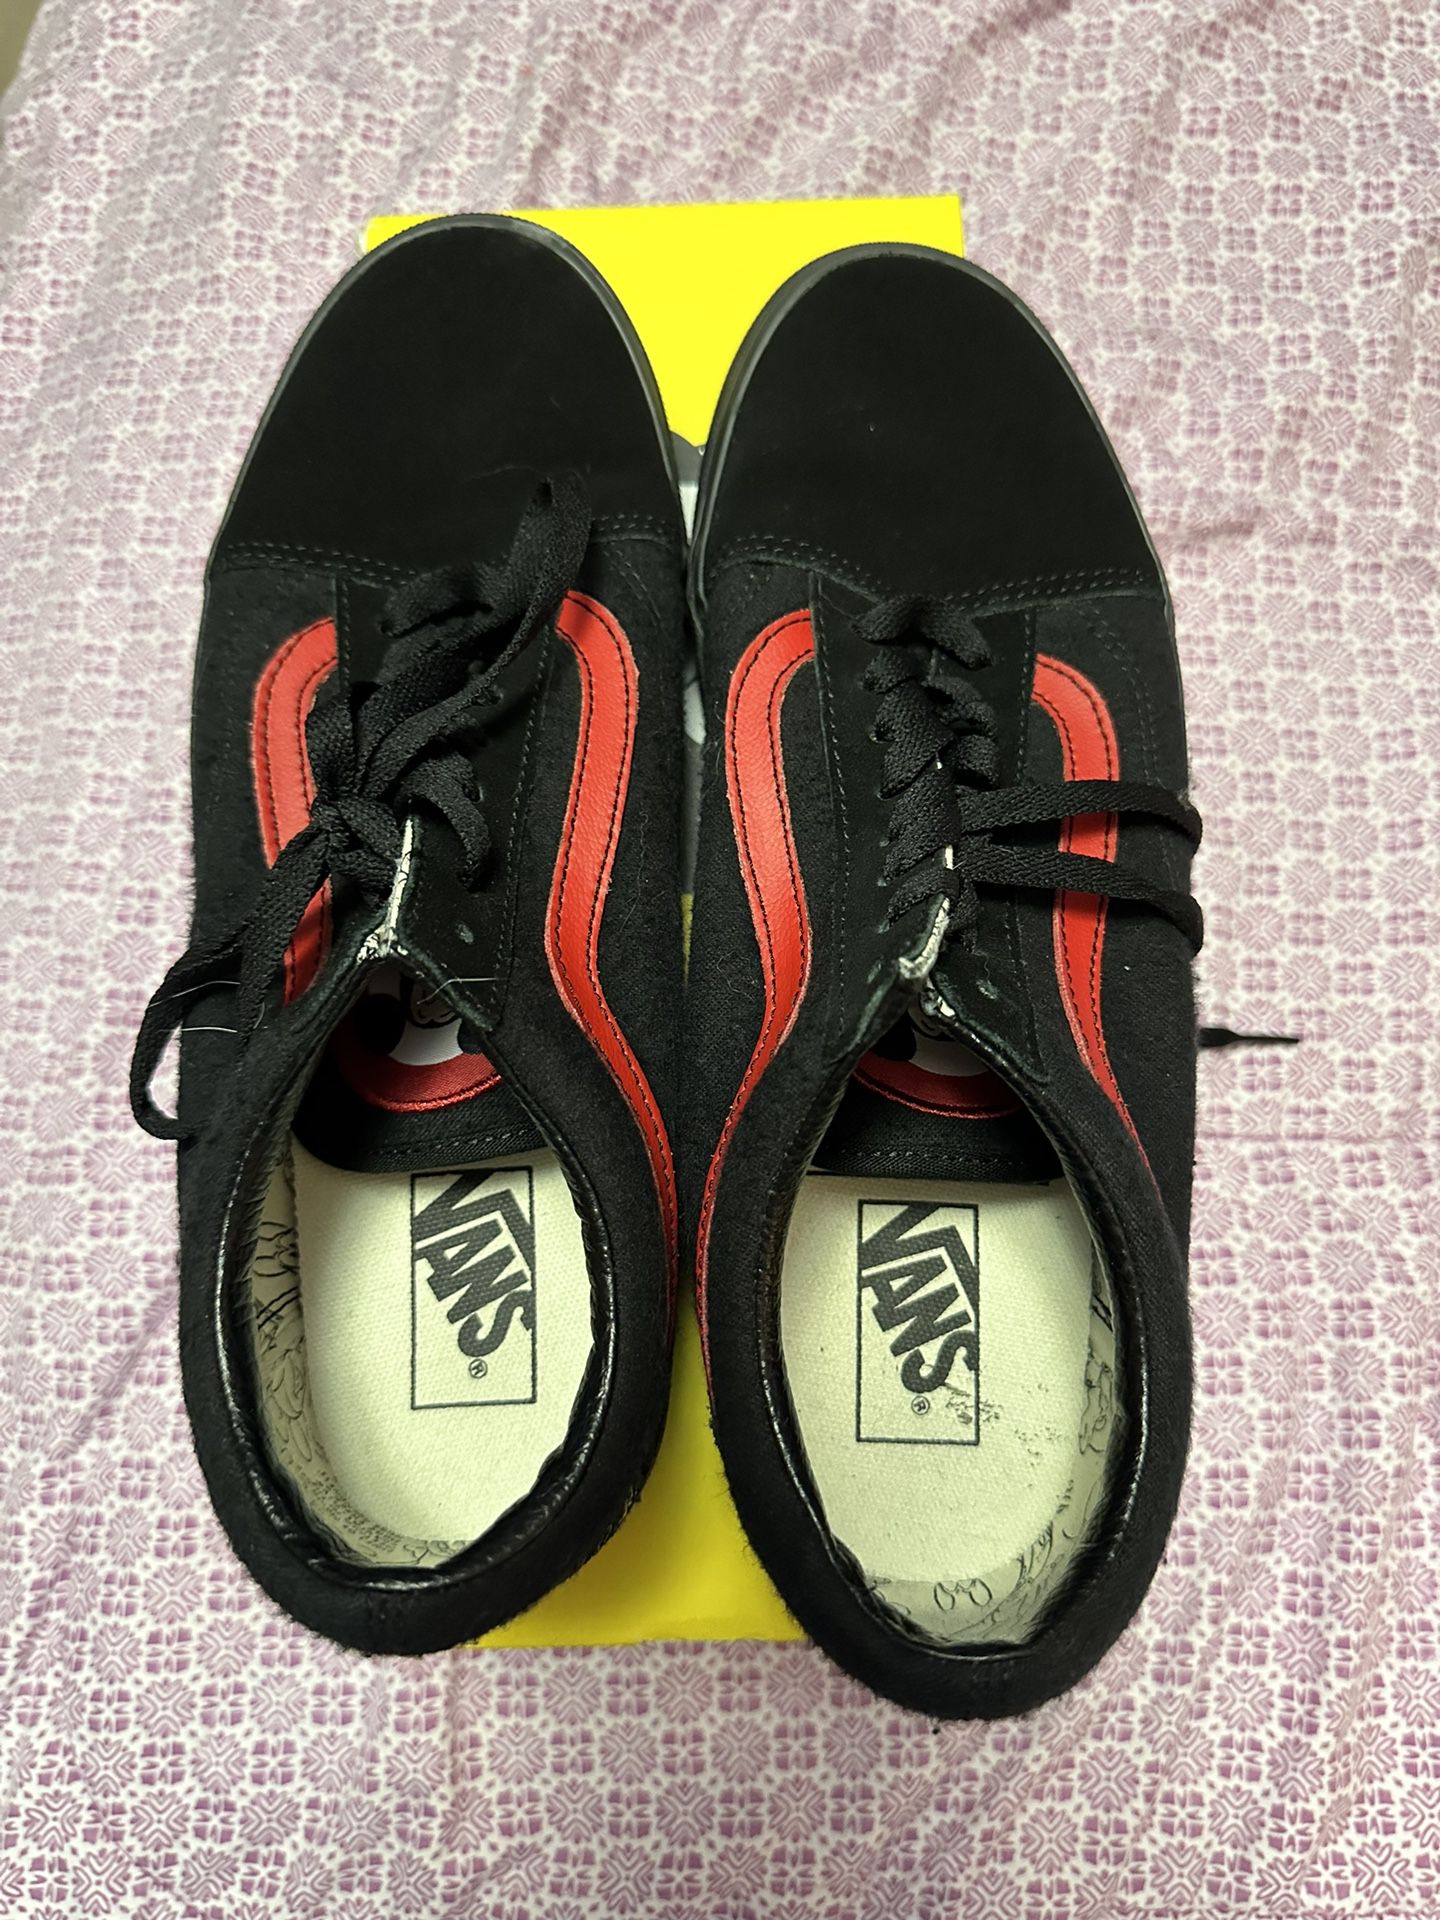 Vans Mickey Mouse Shoes